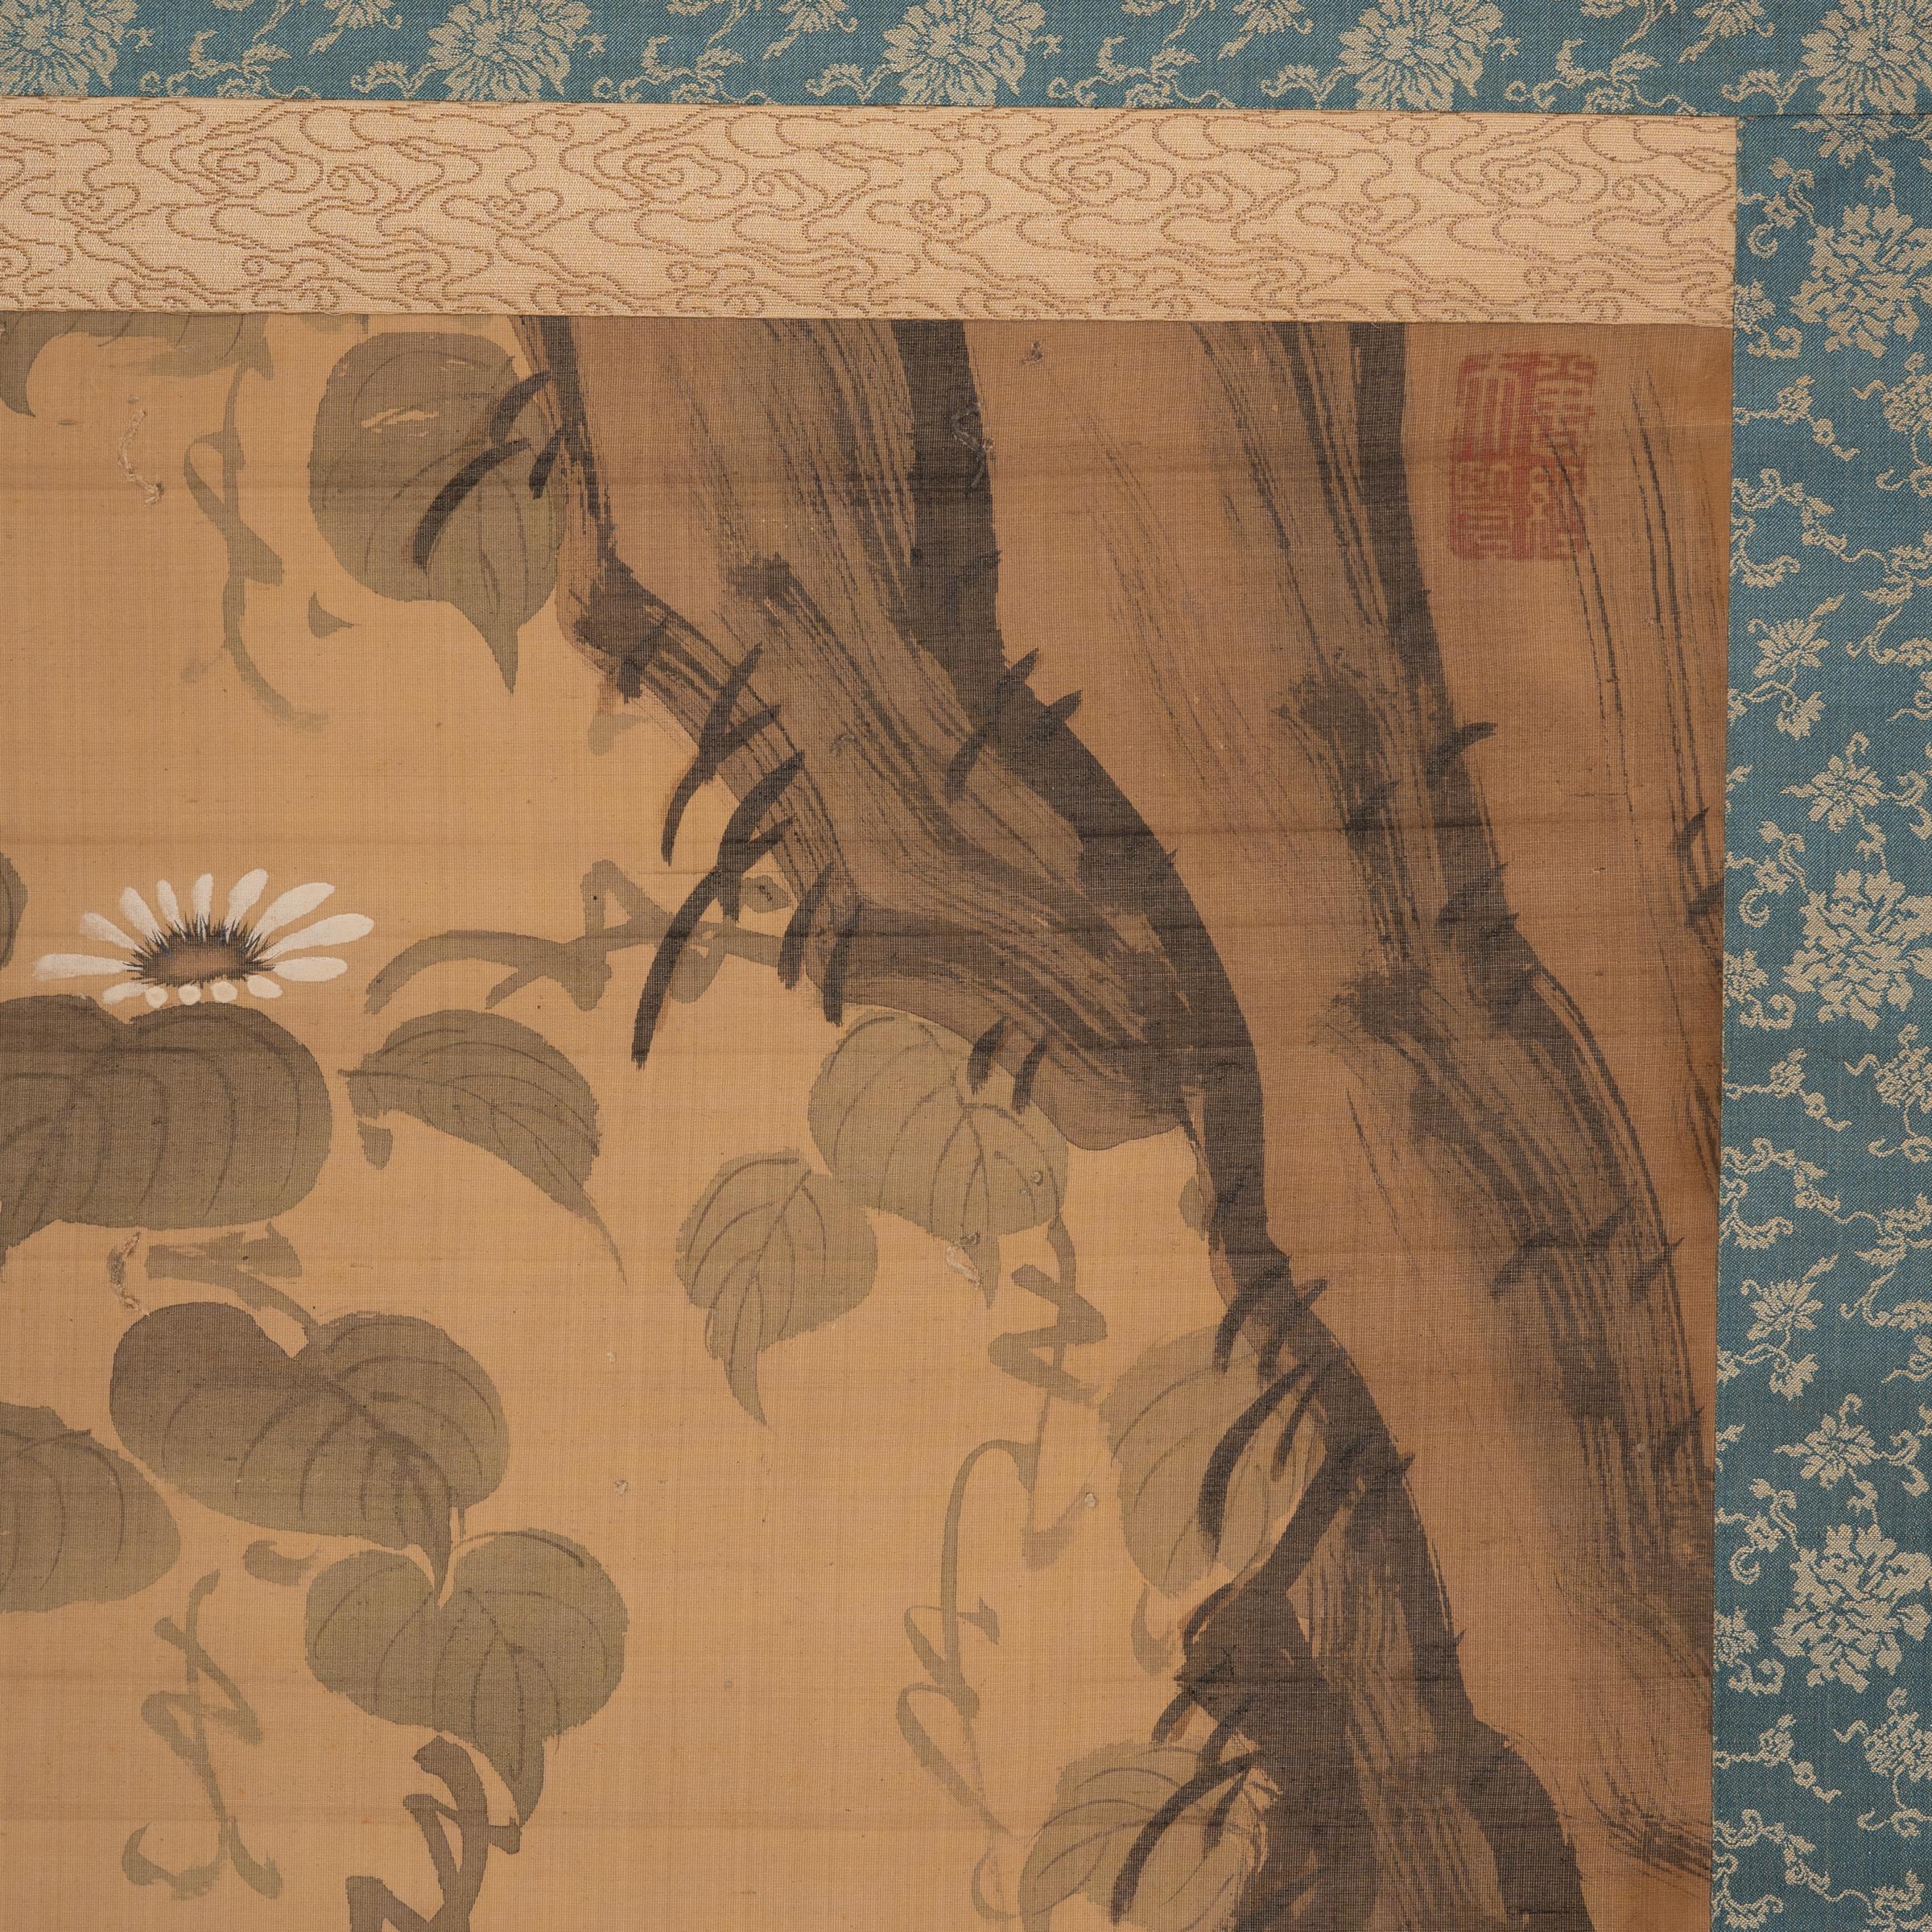 Although Western painting was initially embraced during Japan’s Meiji period (1868–1912), artists brought on a revival of traditional painting styles as they sought to create a modern Japanese style with roots in the past. This decorative hanging